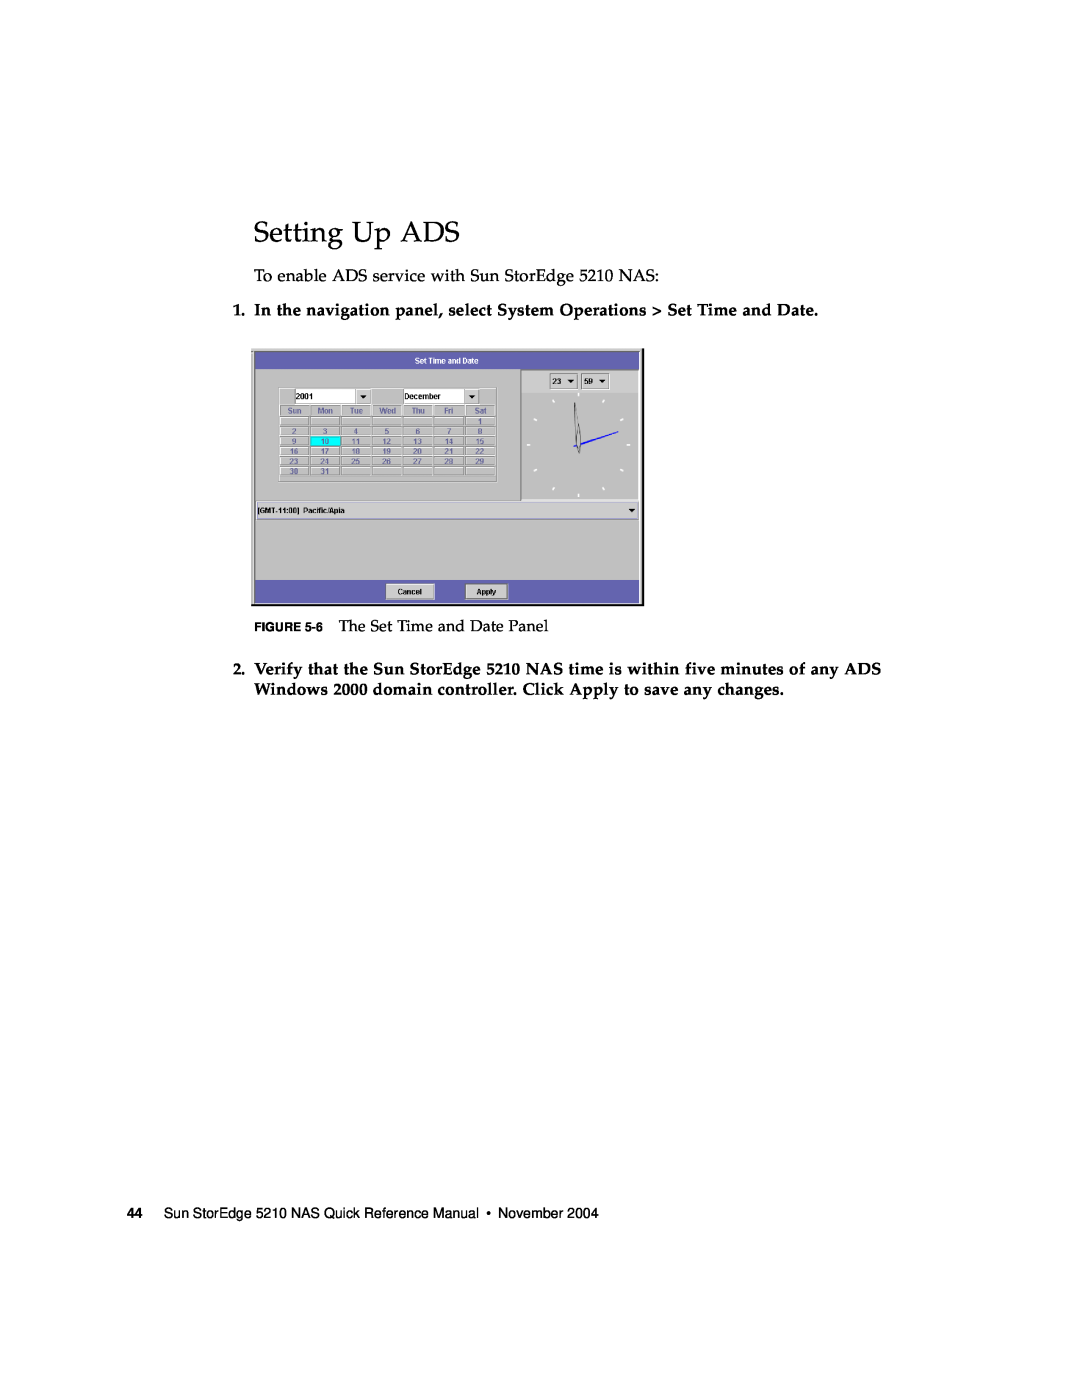 Sun Microsystems manual Setting Up ADS, To enable ADS service with Sun StorEdge 5210 NAS 